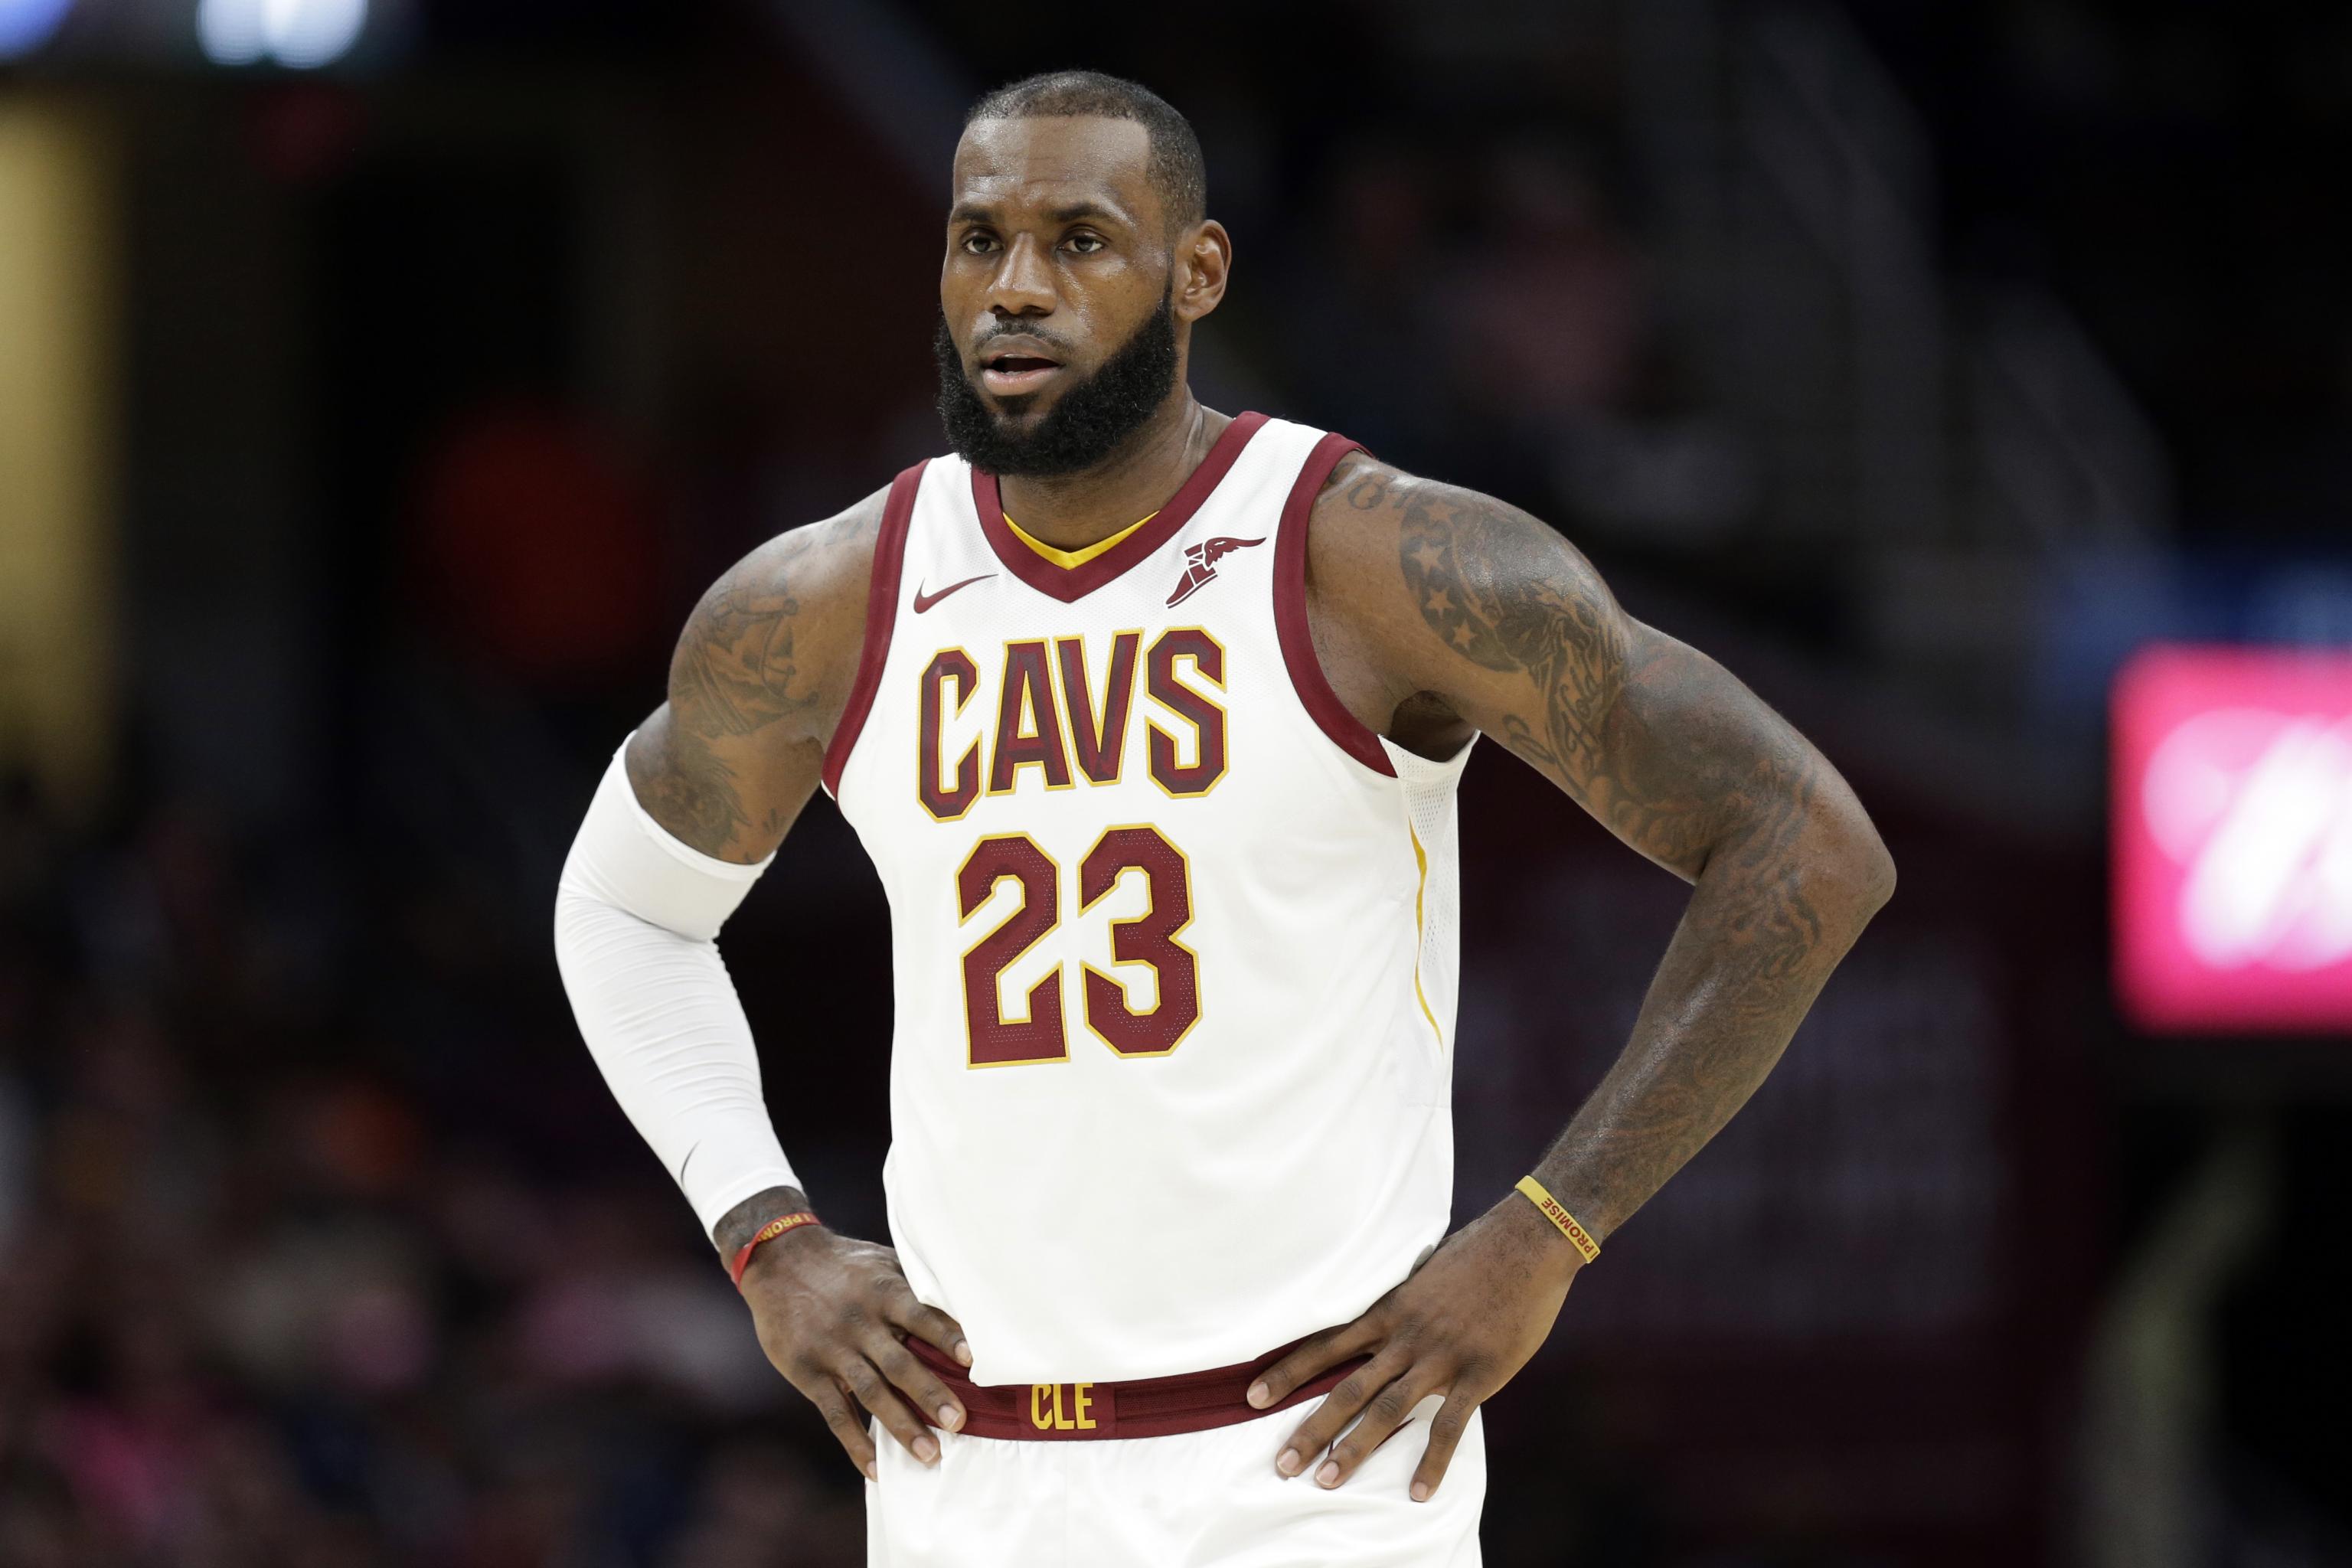 LeBron James says he had right elbow injury after 2017 playoffs